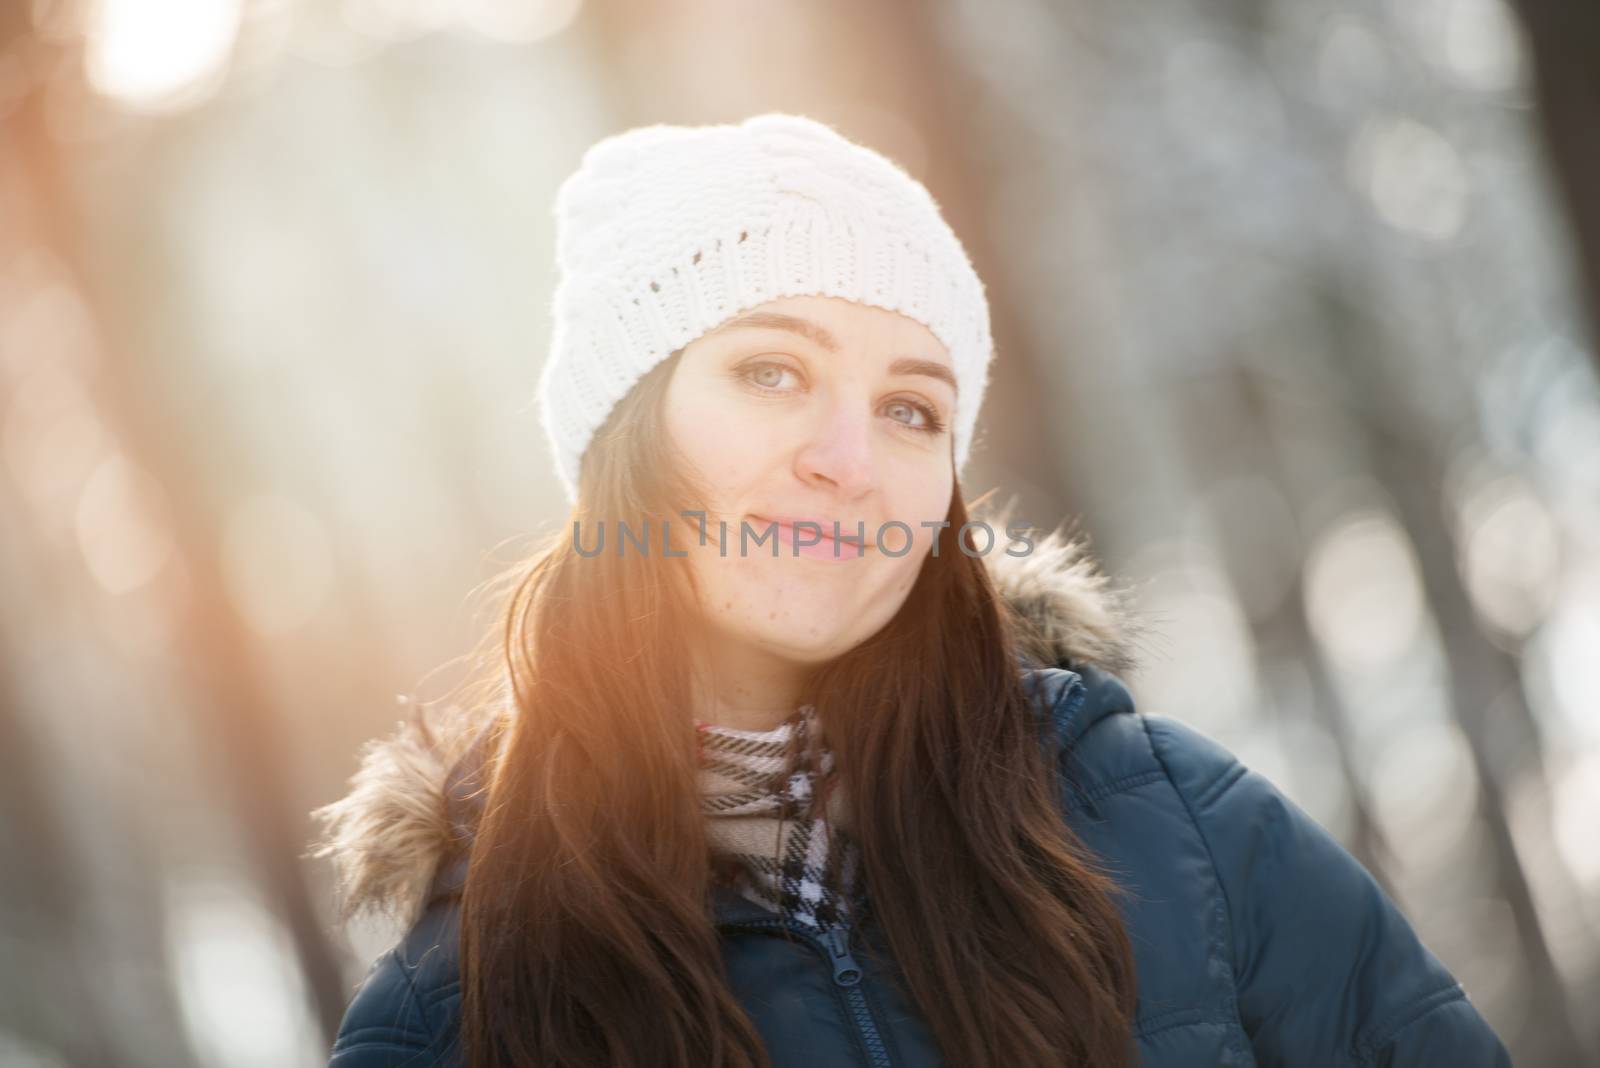 An image of young woman on a walk in snowy winter